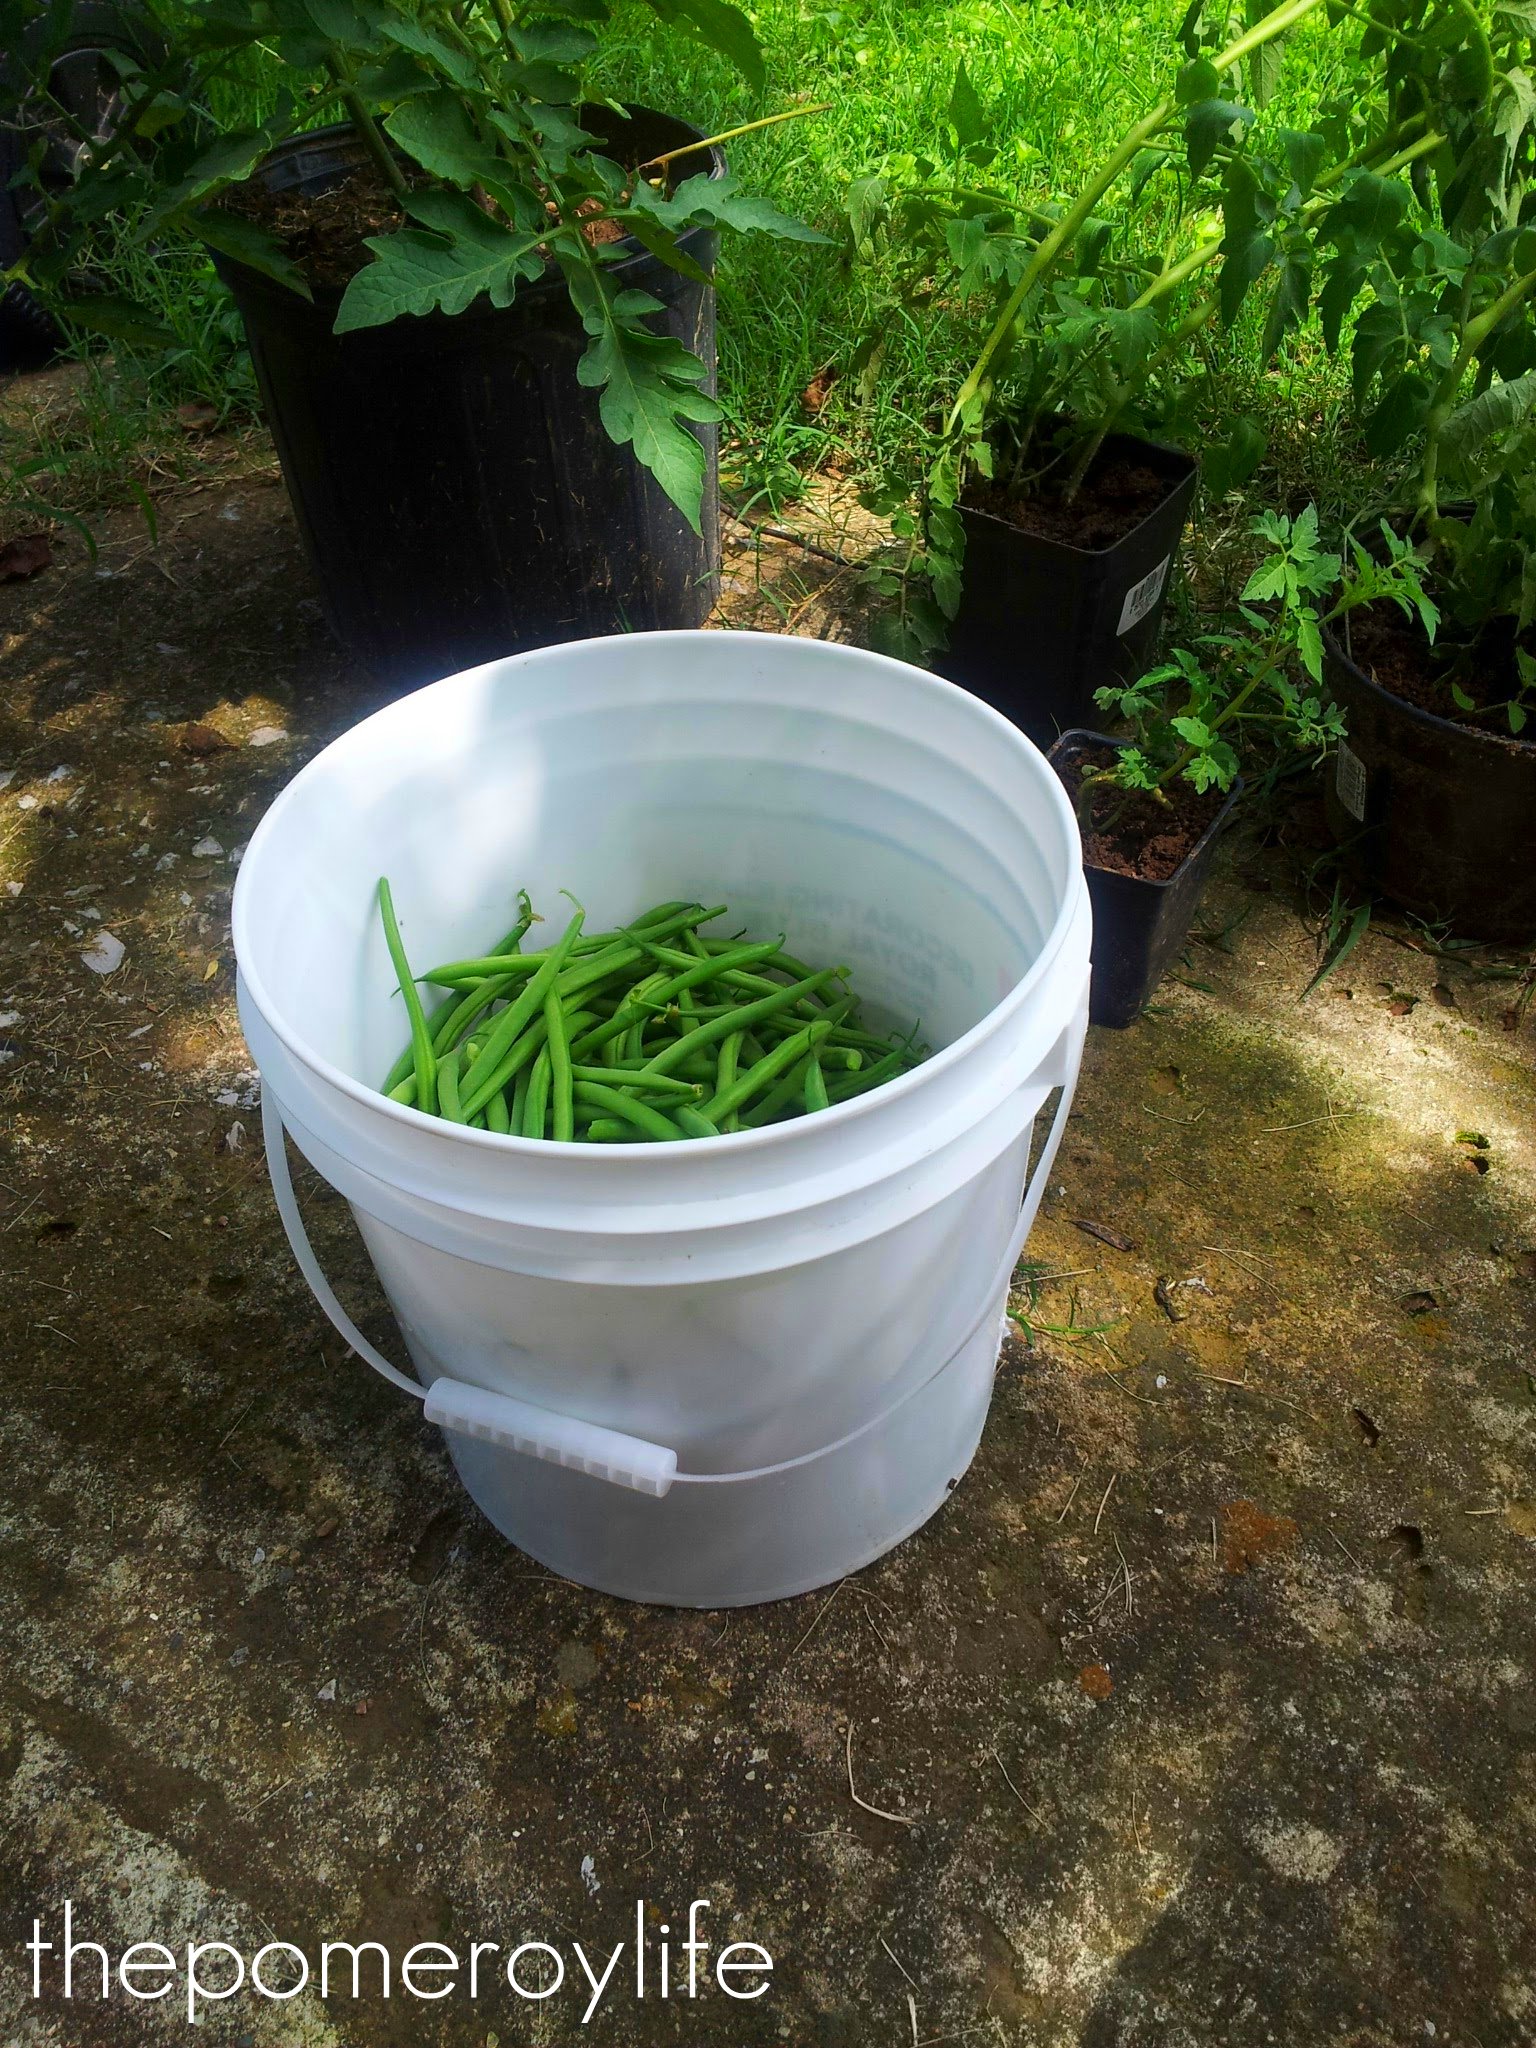 We picked that many green beans every day for a week. Whatâ€™s worse ...